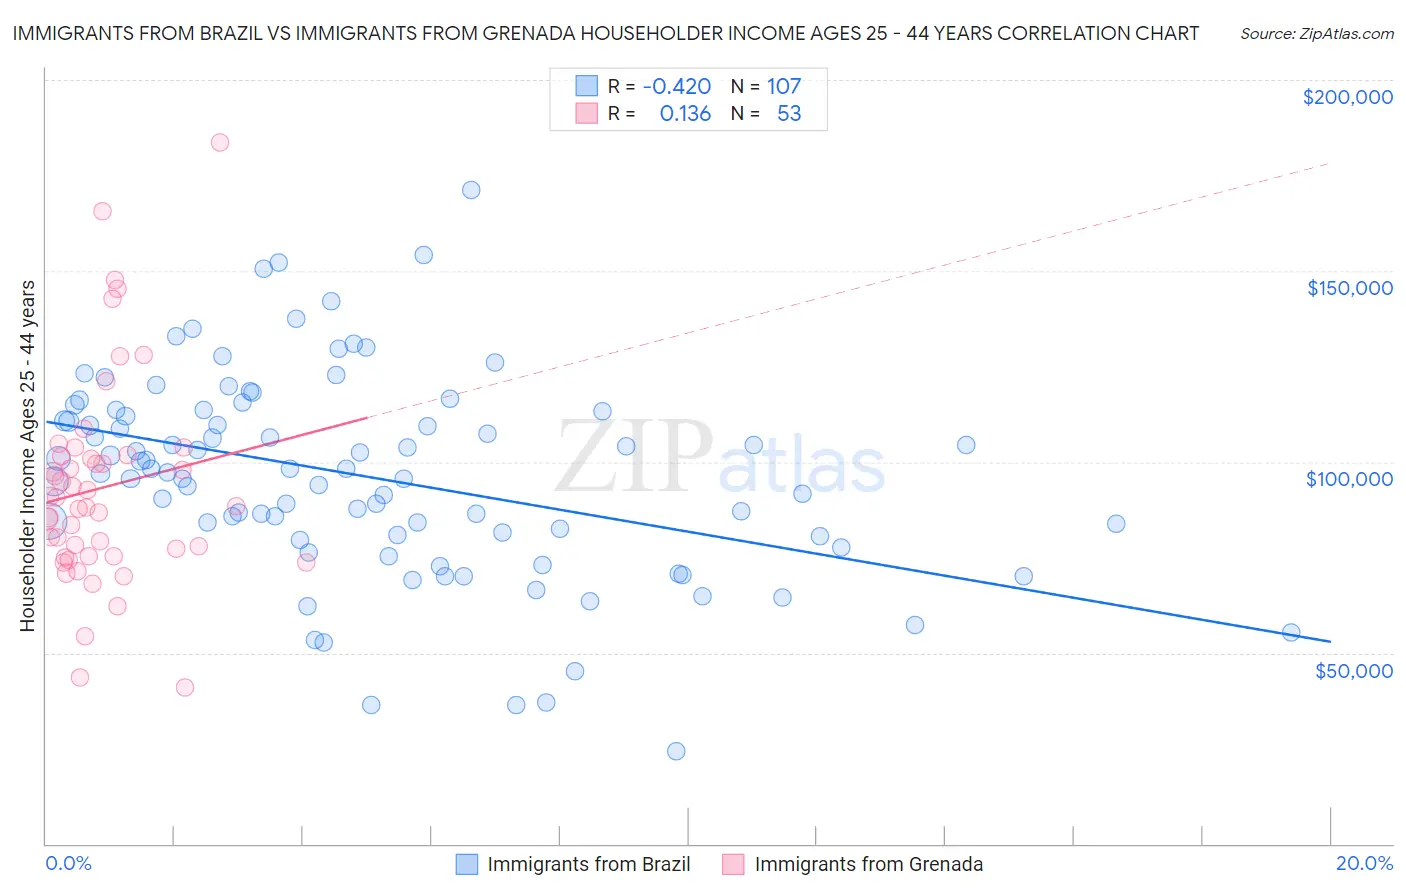 Immigrants from Brazil vs Immigrants from Grenada Householder Income Ages 25 - 44 years